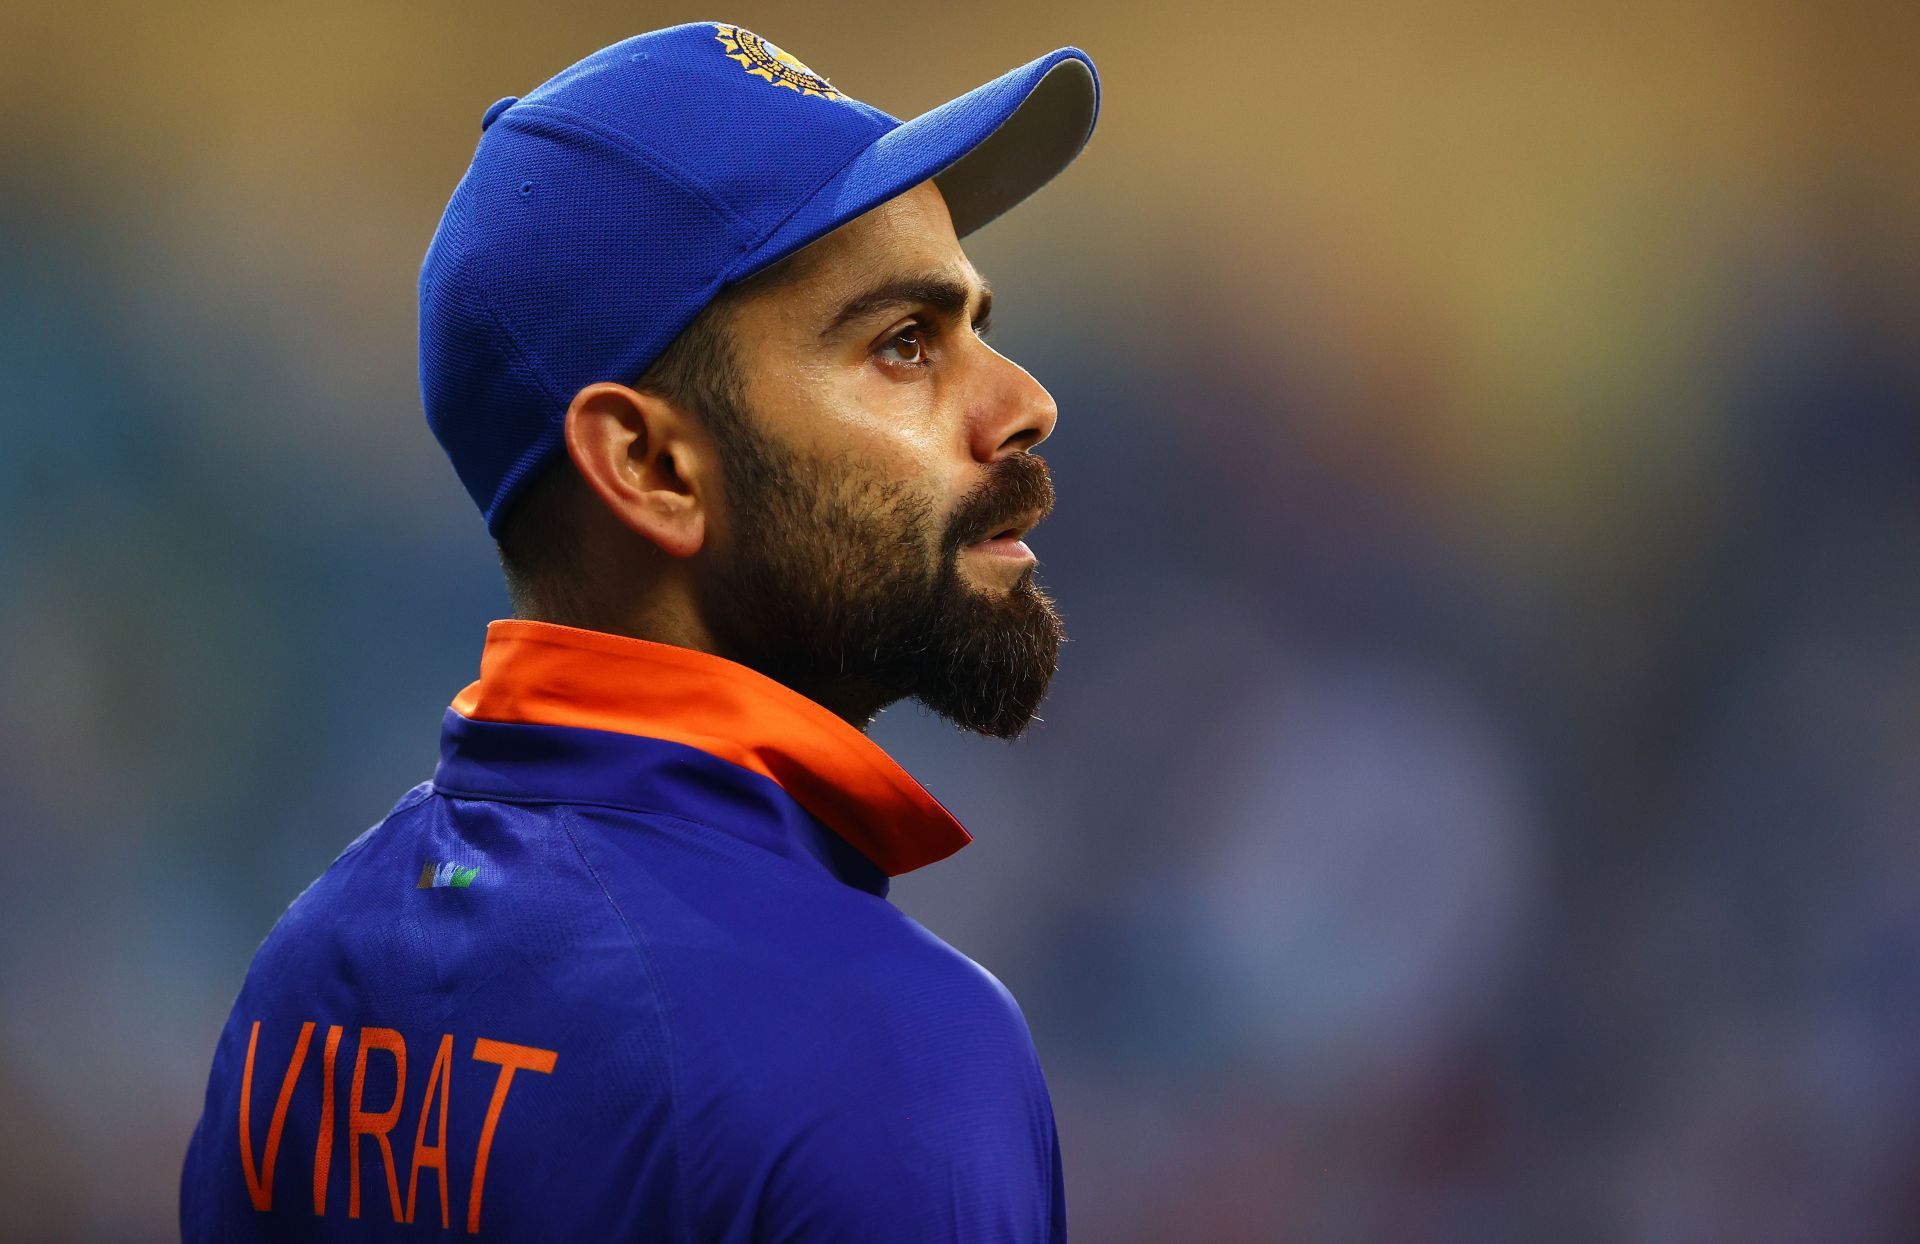 Virat Kohli contradicted most of the statements made by the BCCI members